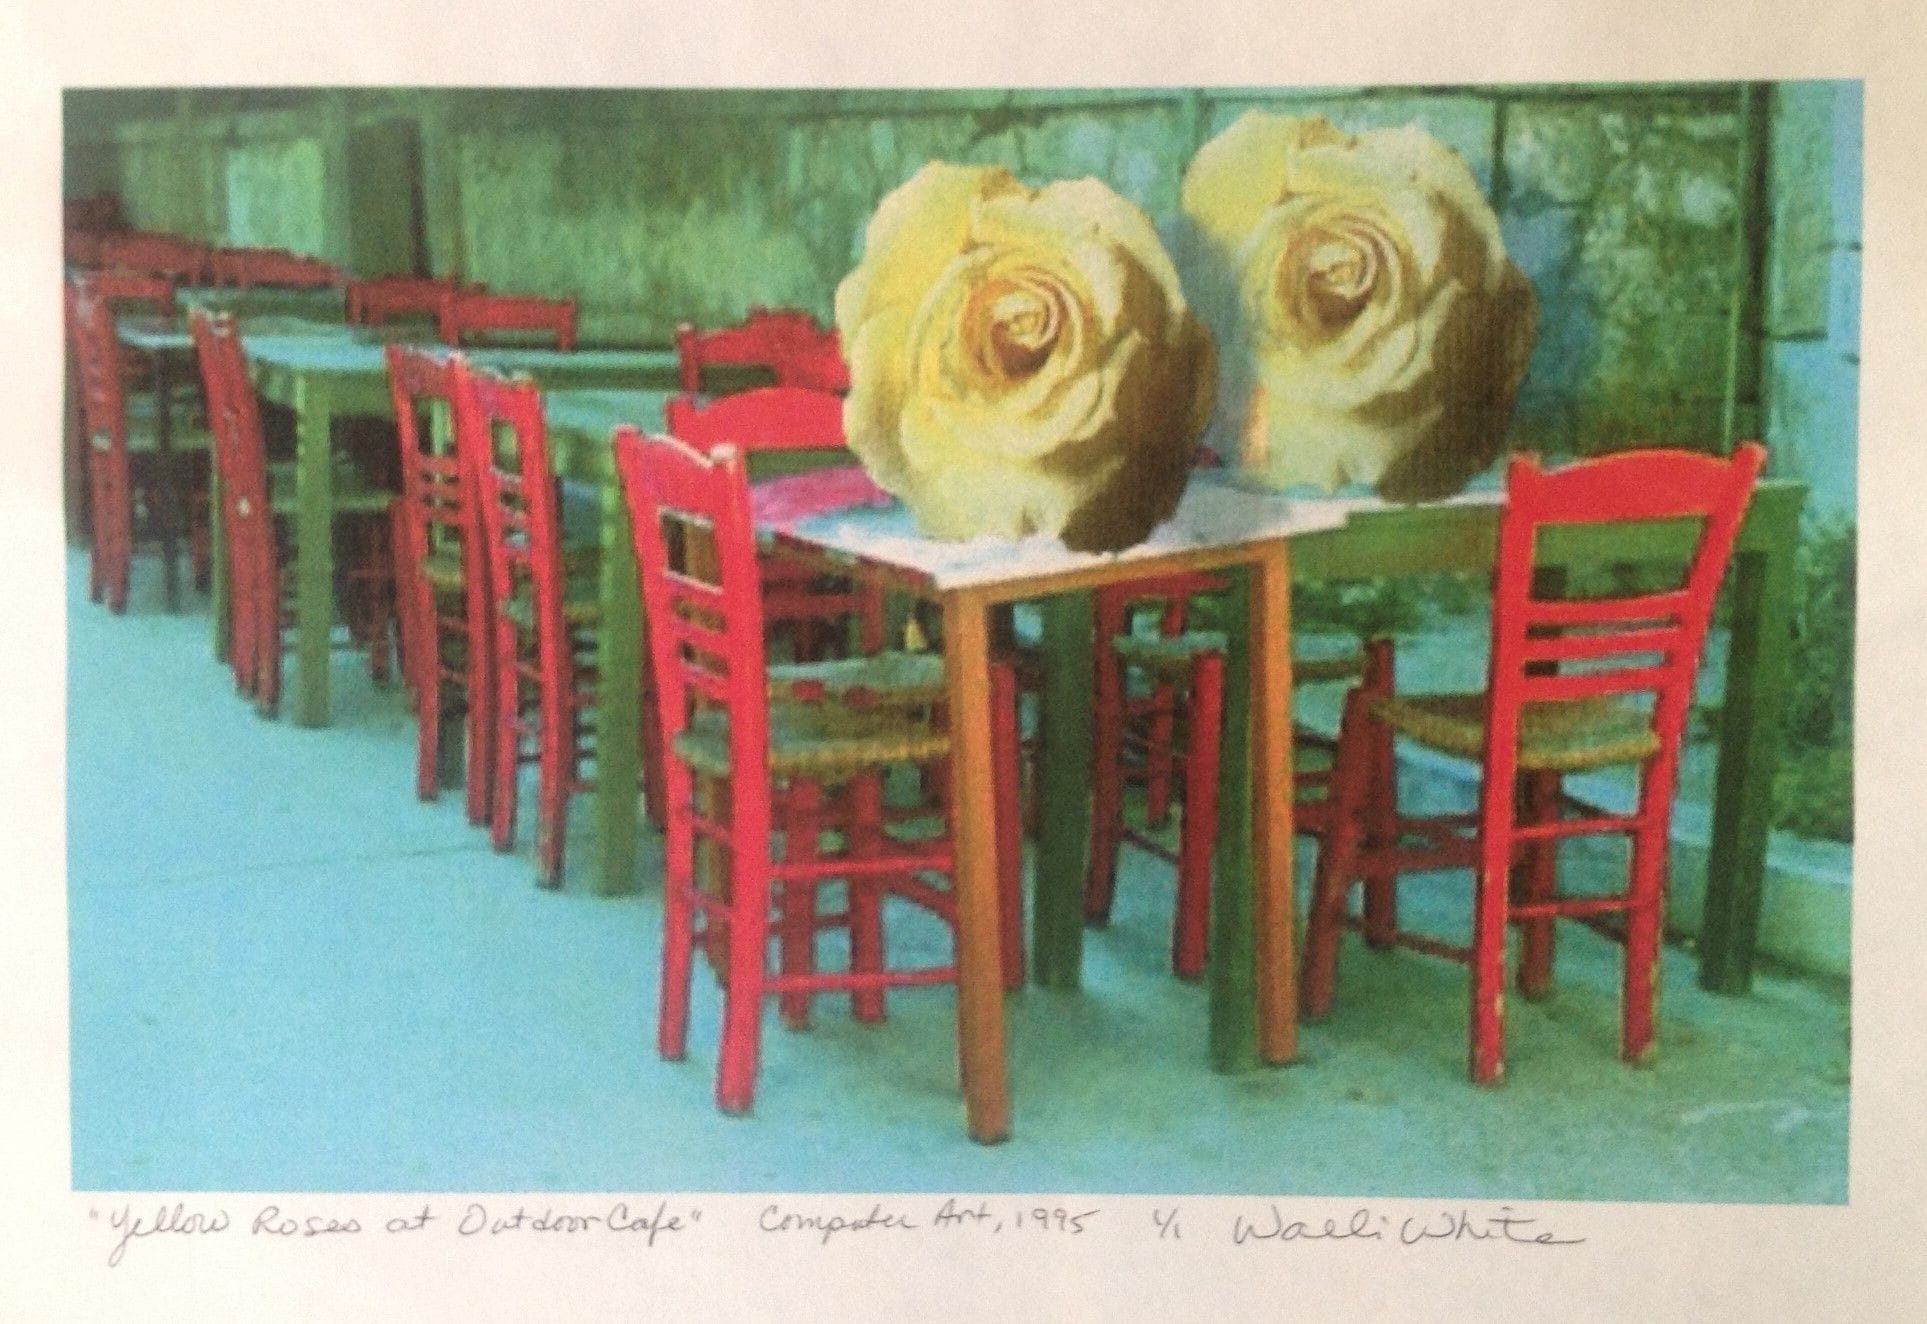 Yellow Roses at Outdoor Cafe, 1995
Digital Art, Photoshop
10"W x 8"H, Walli White, artist